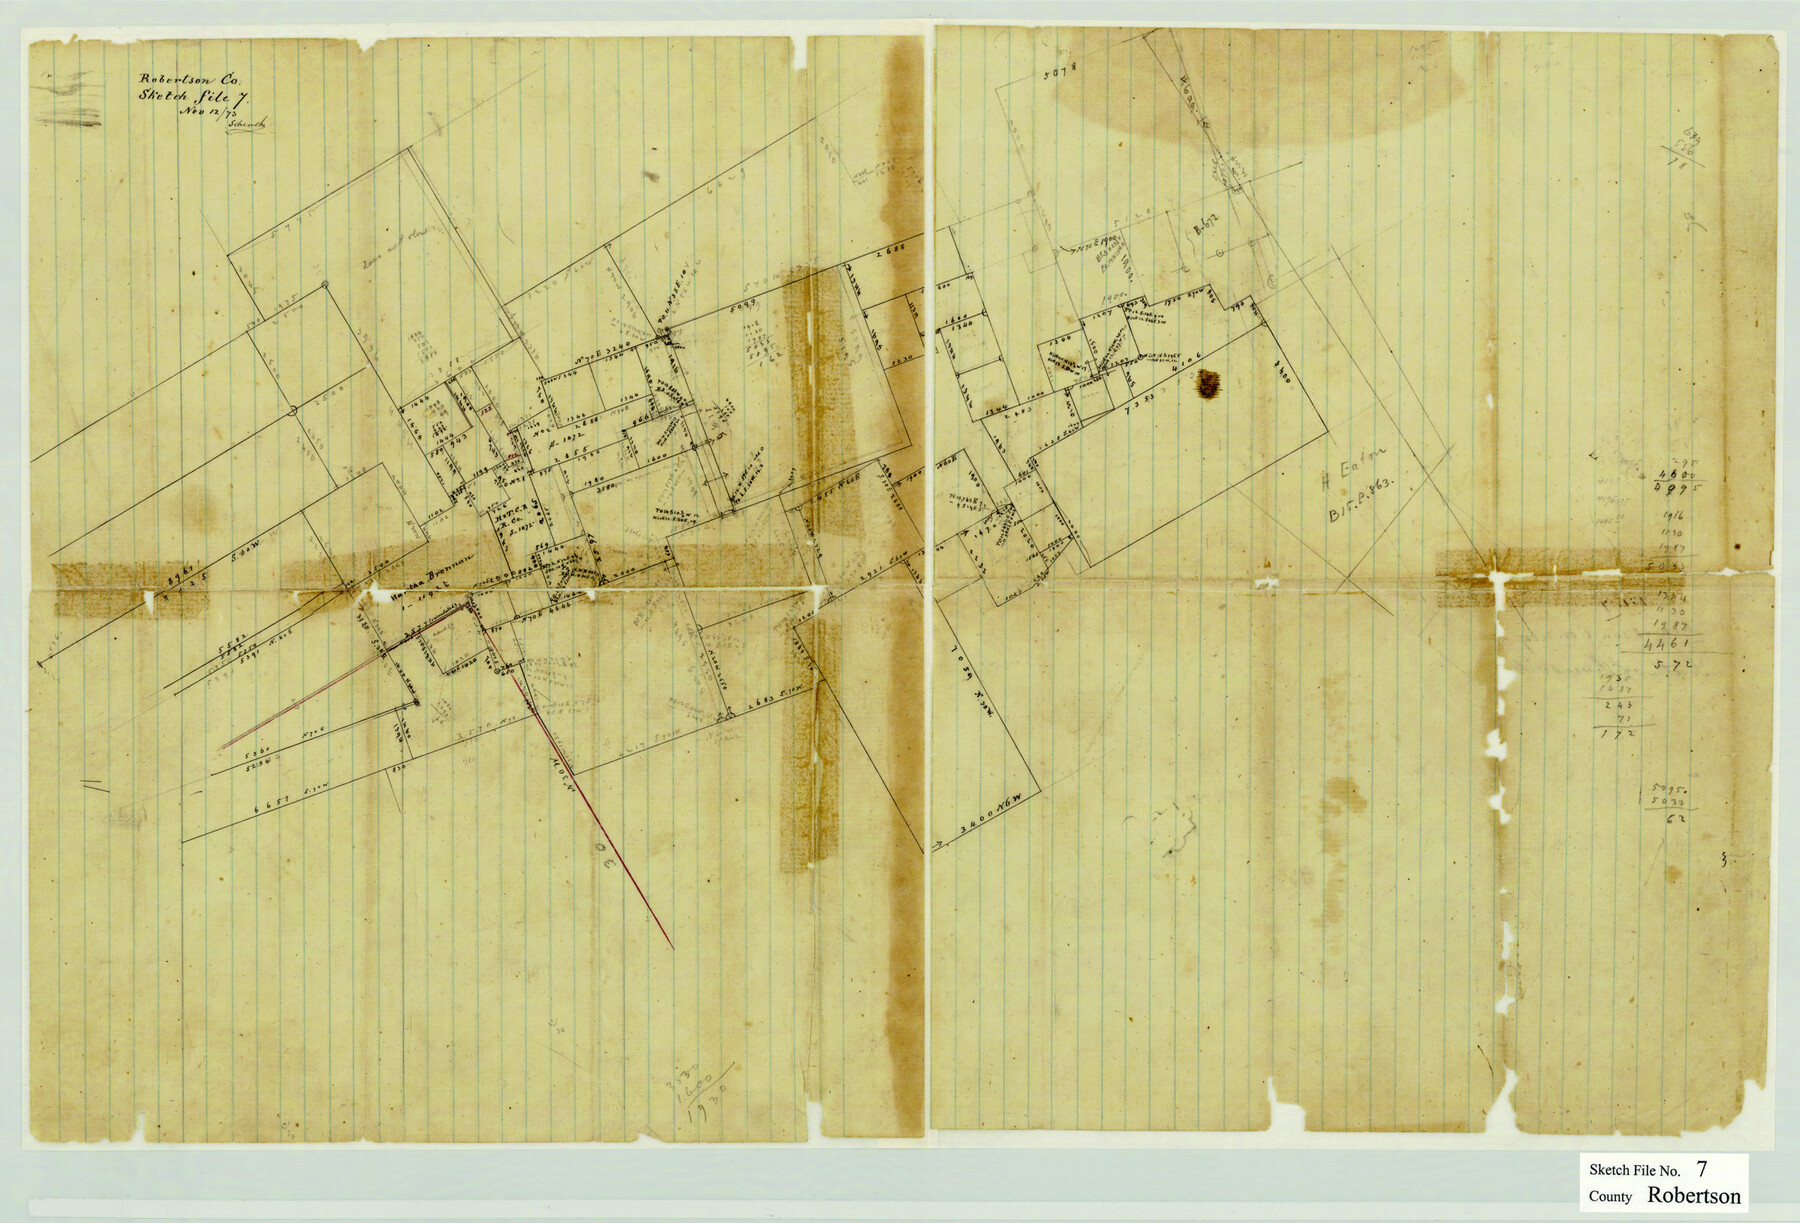 12250, Robertson County Sketch File 7, General Map Collection